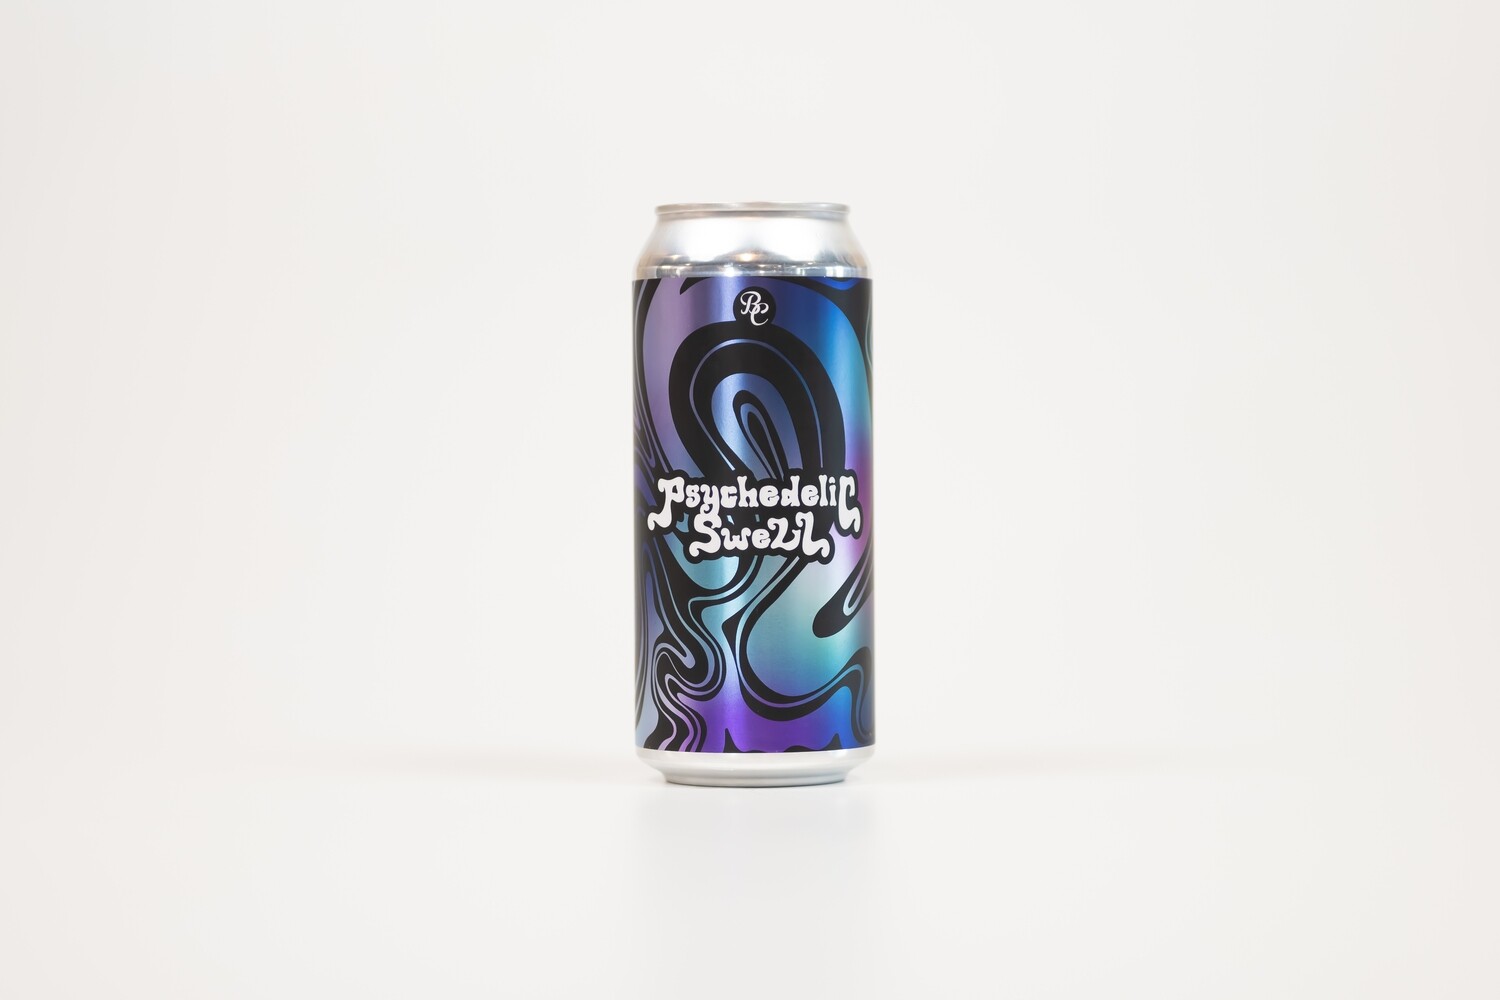 Psychedelic Swell 16oz Cans - 4pk